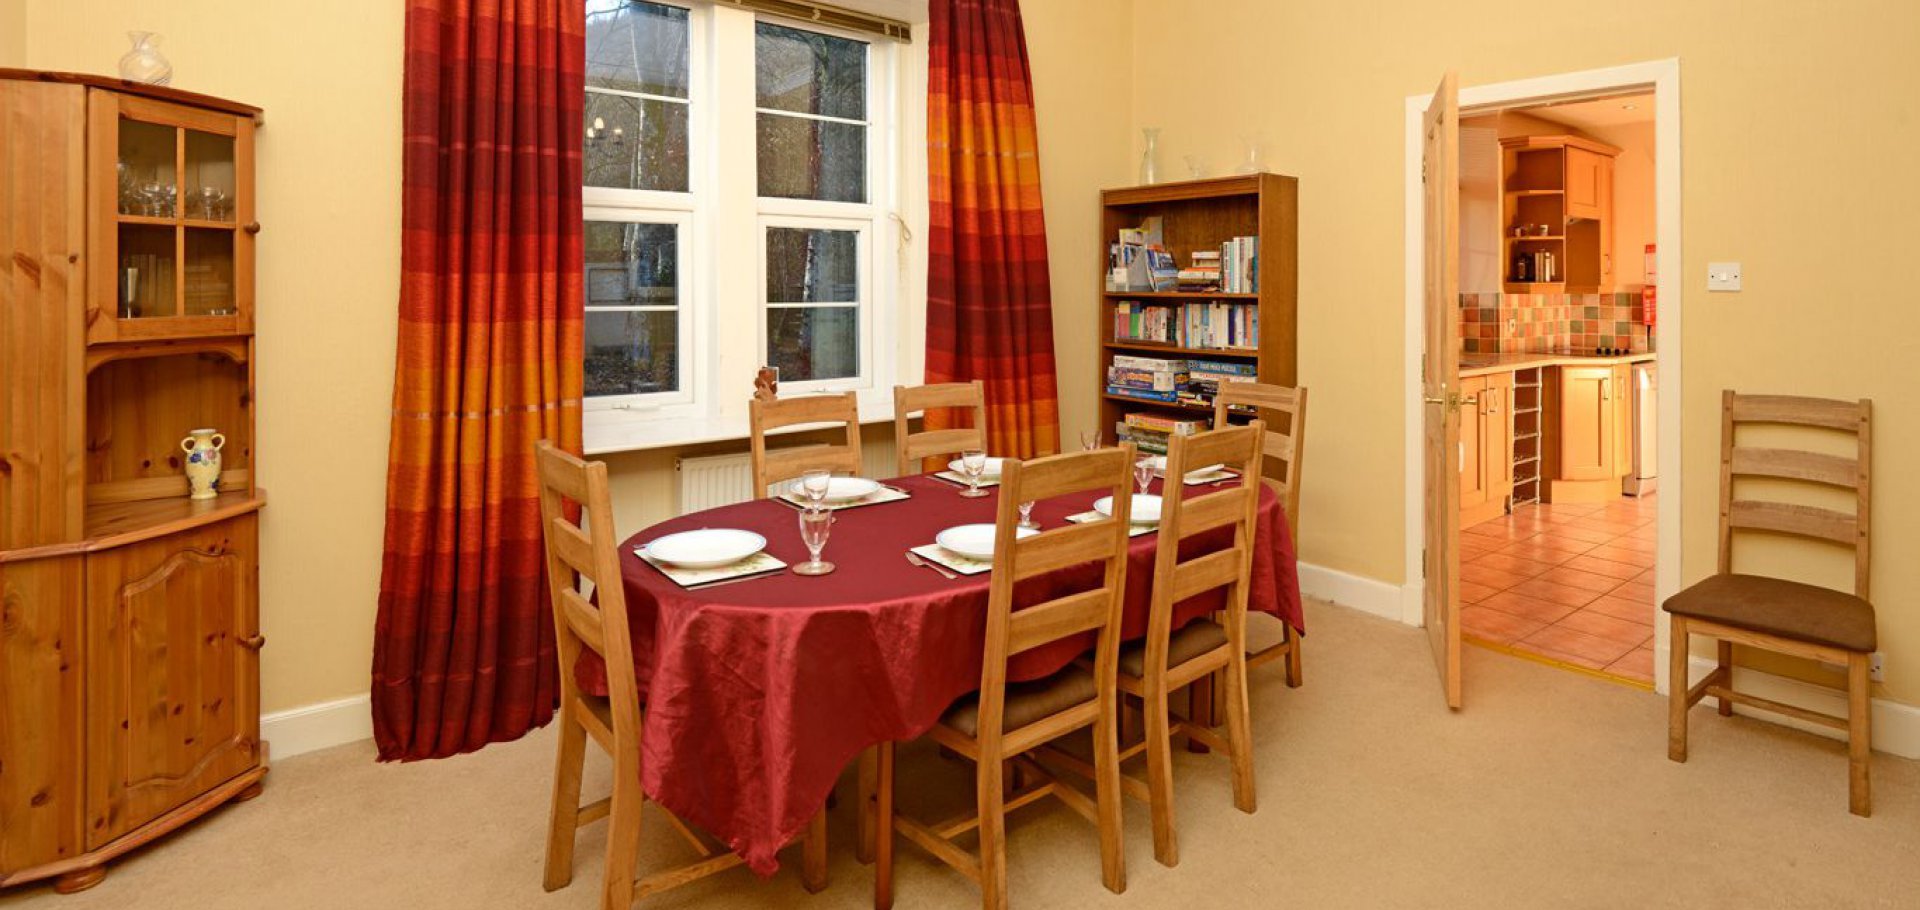 self catering holiday cottage in south west scotland